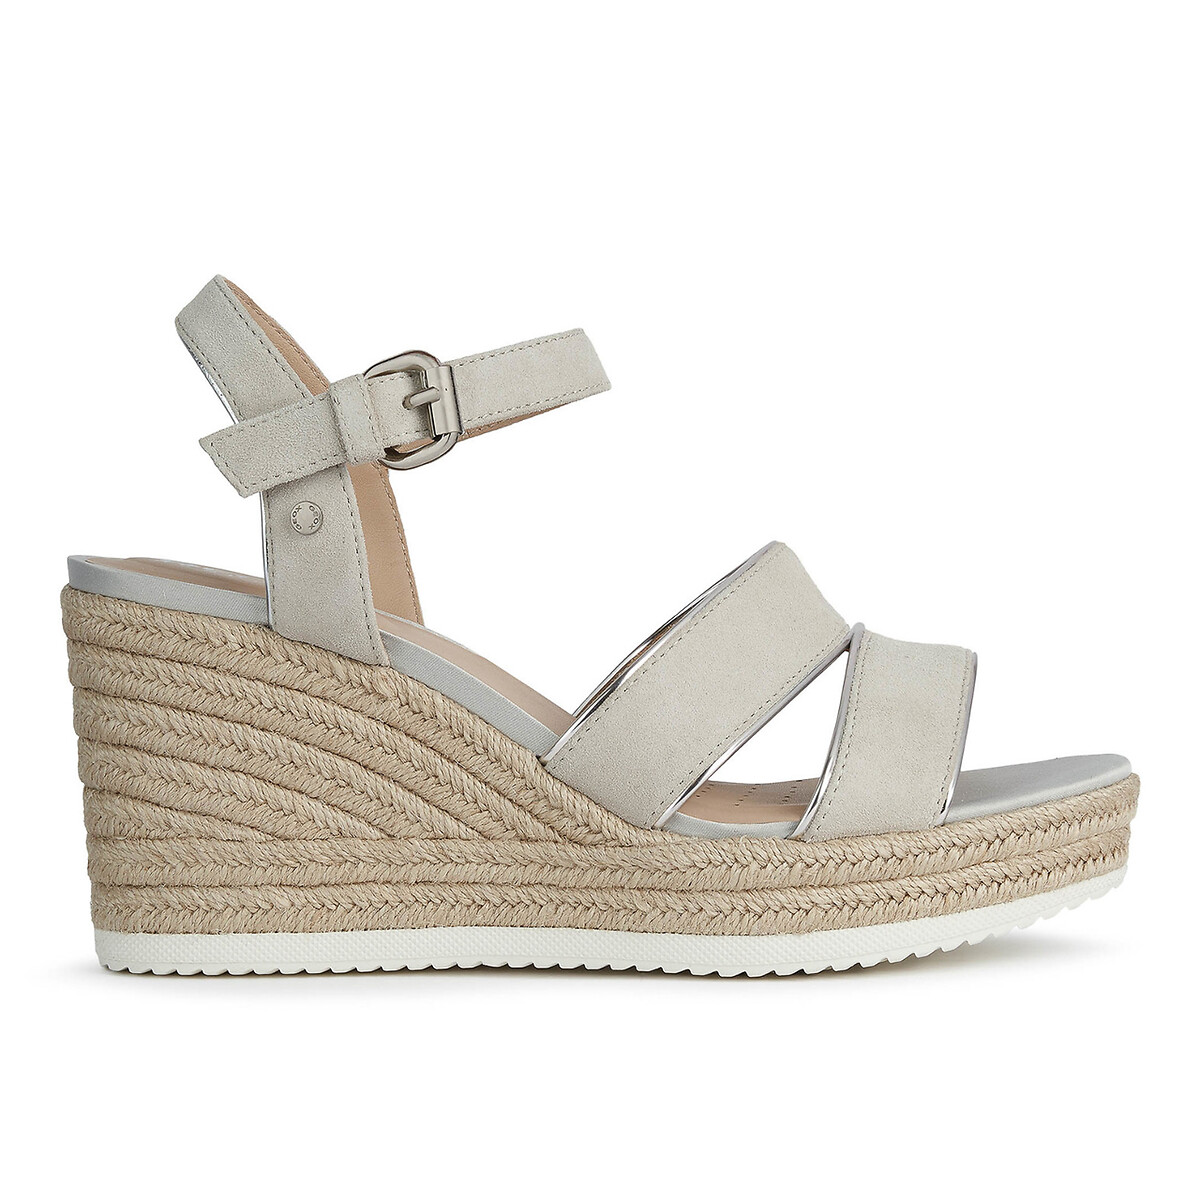 Ponza leather wedge espadrille sandals , silver-coloured, Geox | La Redoute